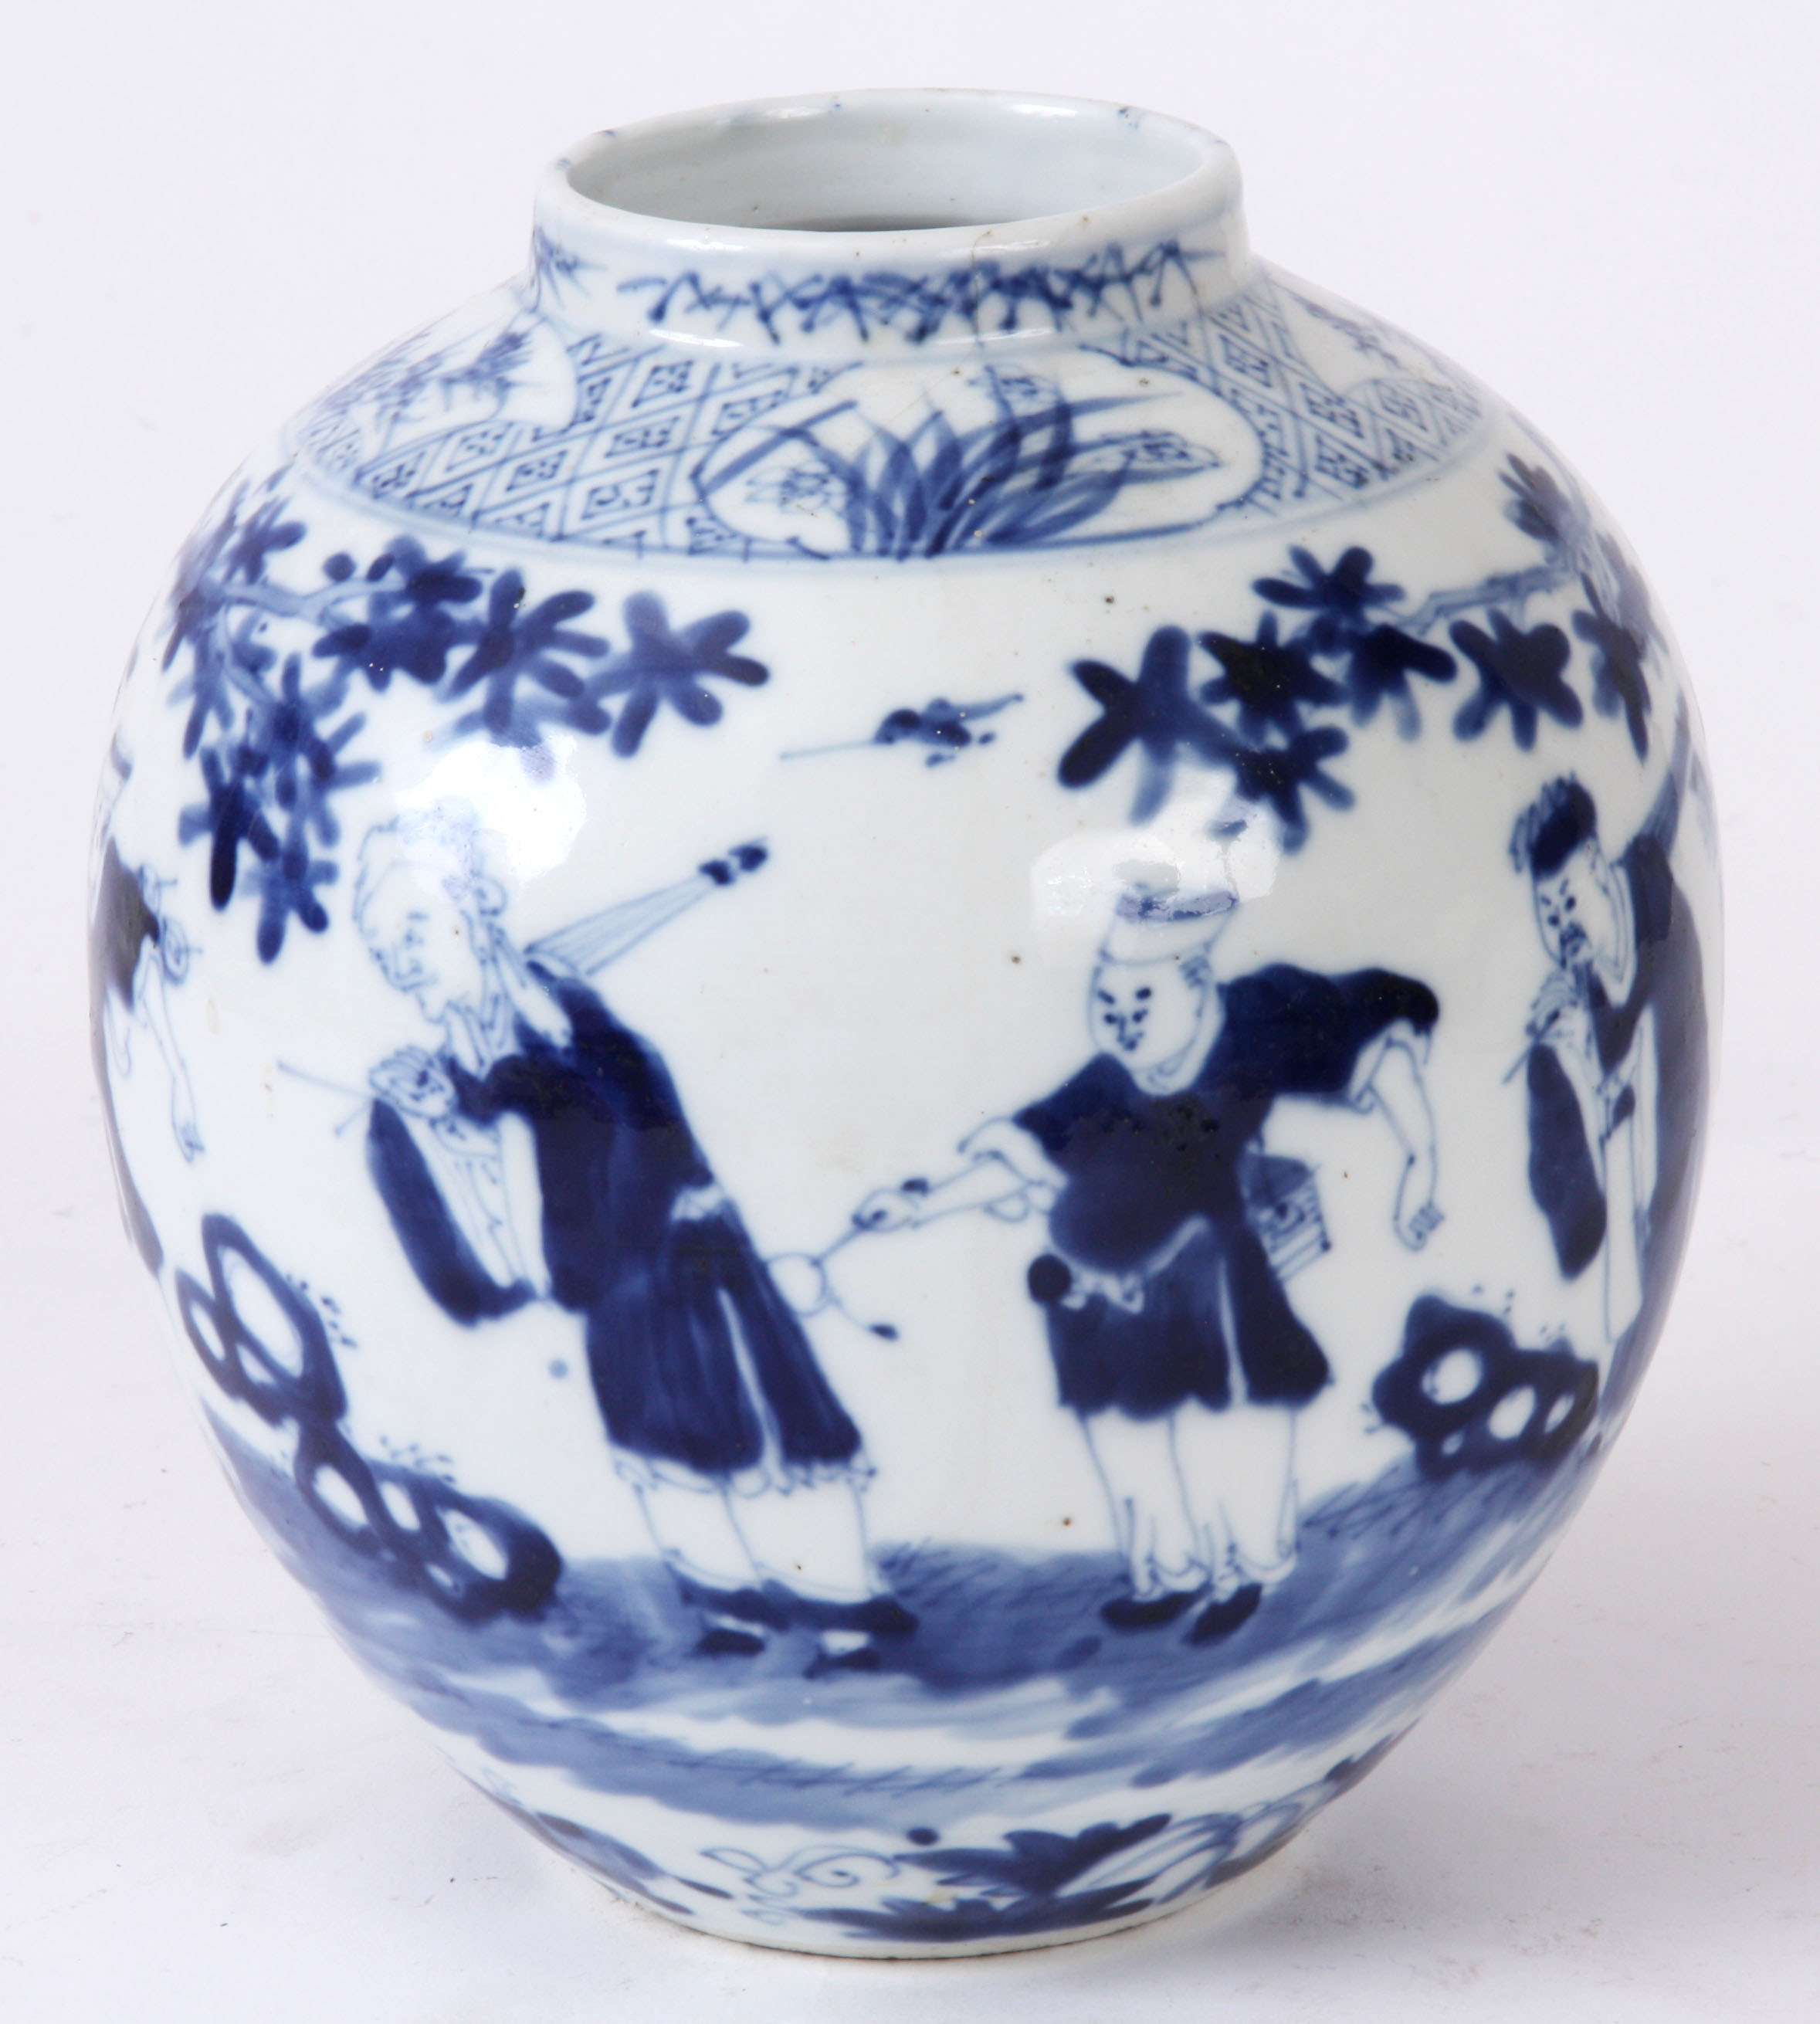 A LATE 17TH/ EARLY 18TH CENTURY CHINESE BLUE AND WHITE BULBOUS VASE decorated with figures in a